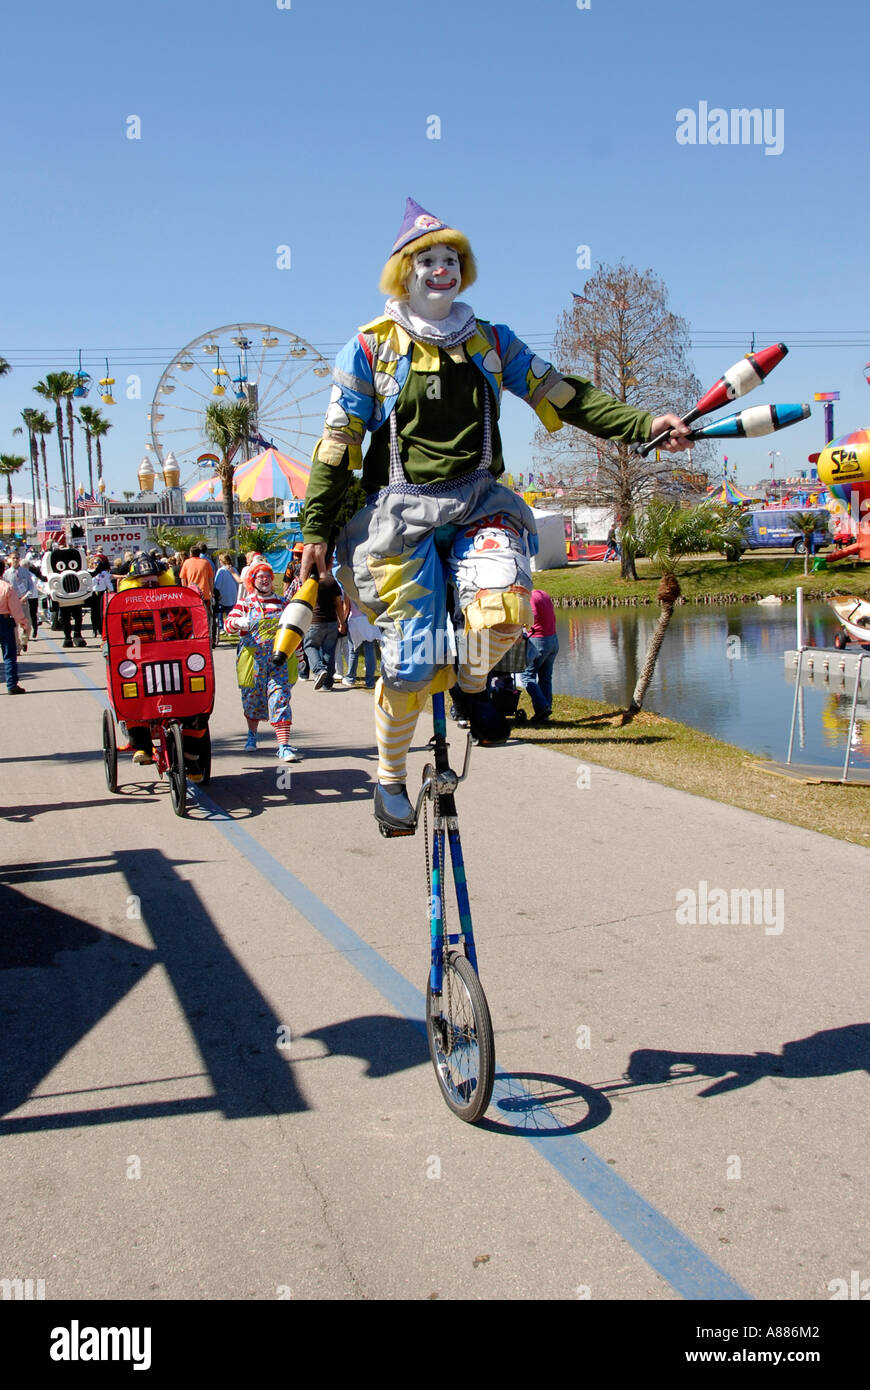 Clown riding on a unicycle participates in a parade at the Florida State Fair in Tampa Florida FL Stock Photo